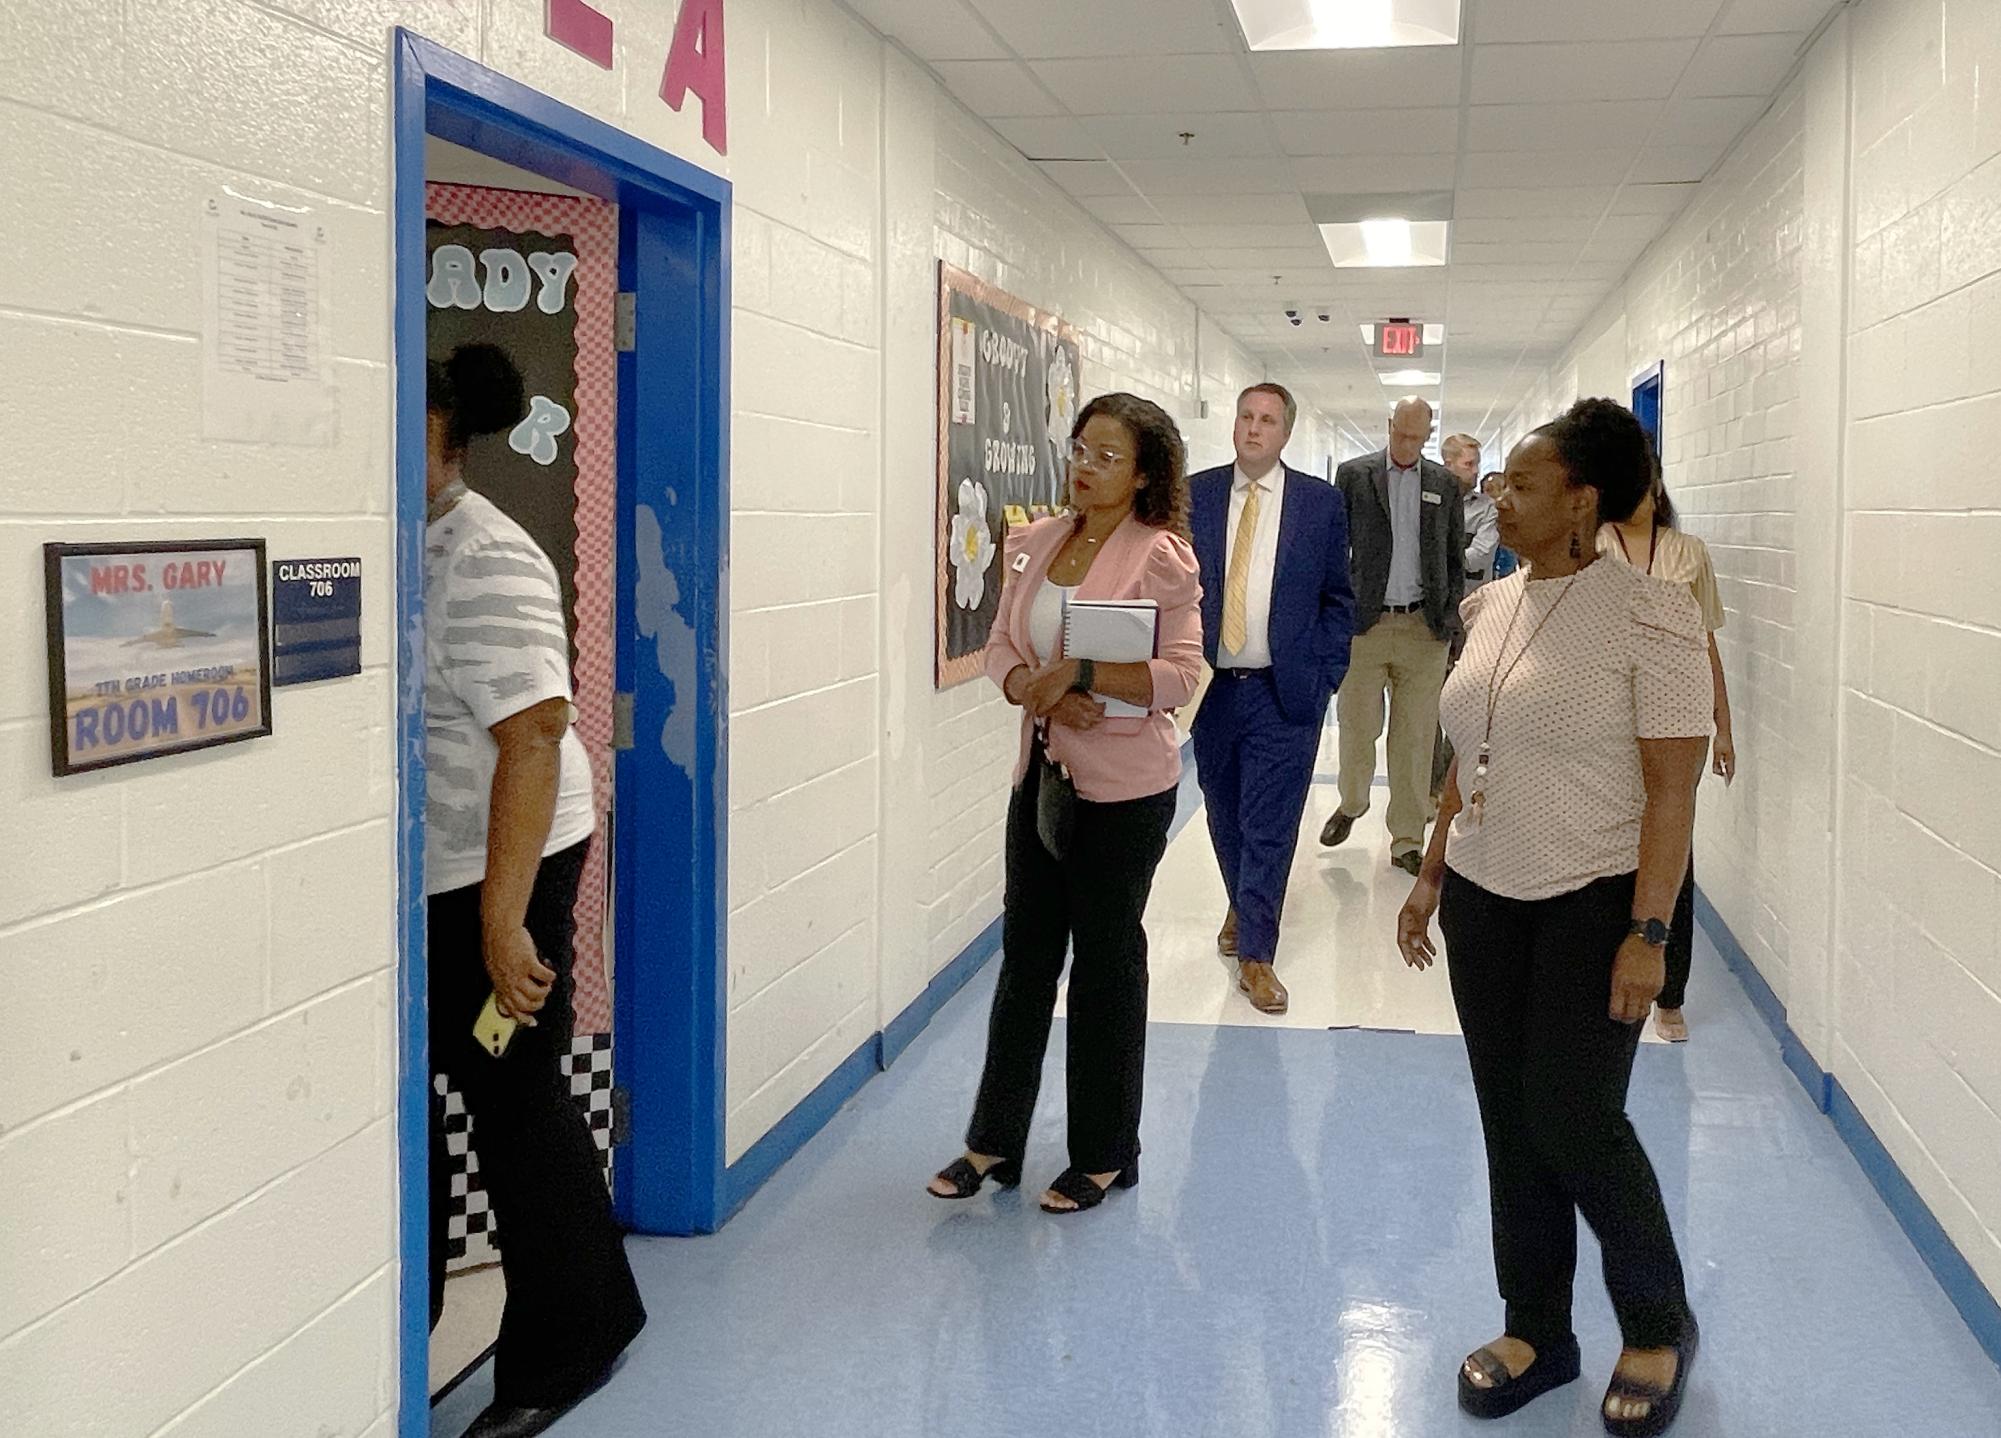 Staff and board members of the State Charter Schools Commission visited Cirrus Academy on Aug. 23 to discuss the schools eligibility for renewal of its charter contract. The current two-year probationary charter expires in June 2024.